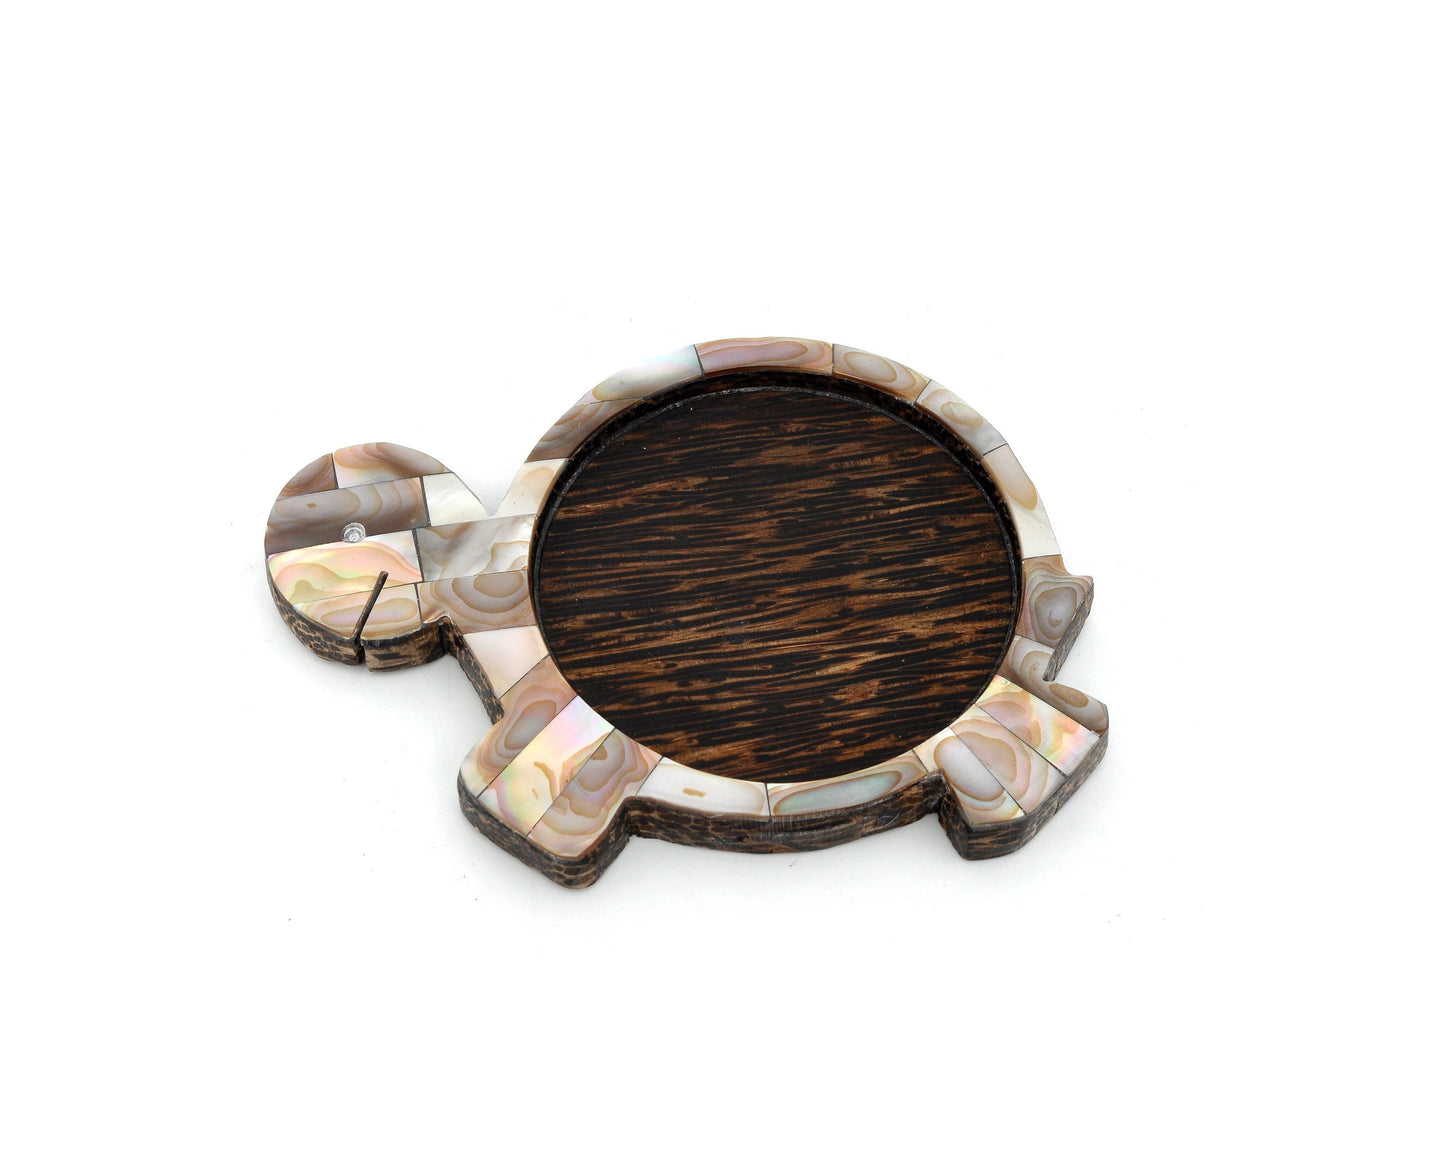 Myanmar Handmade Coconut Wood Turtle Coaster With Mother of Pearl Inlay